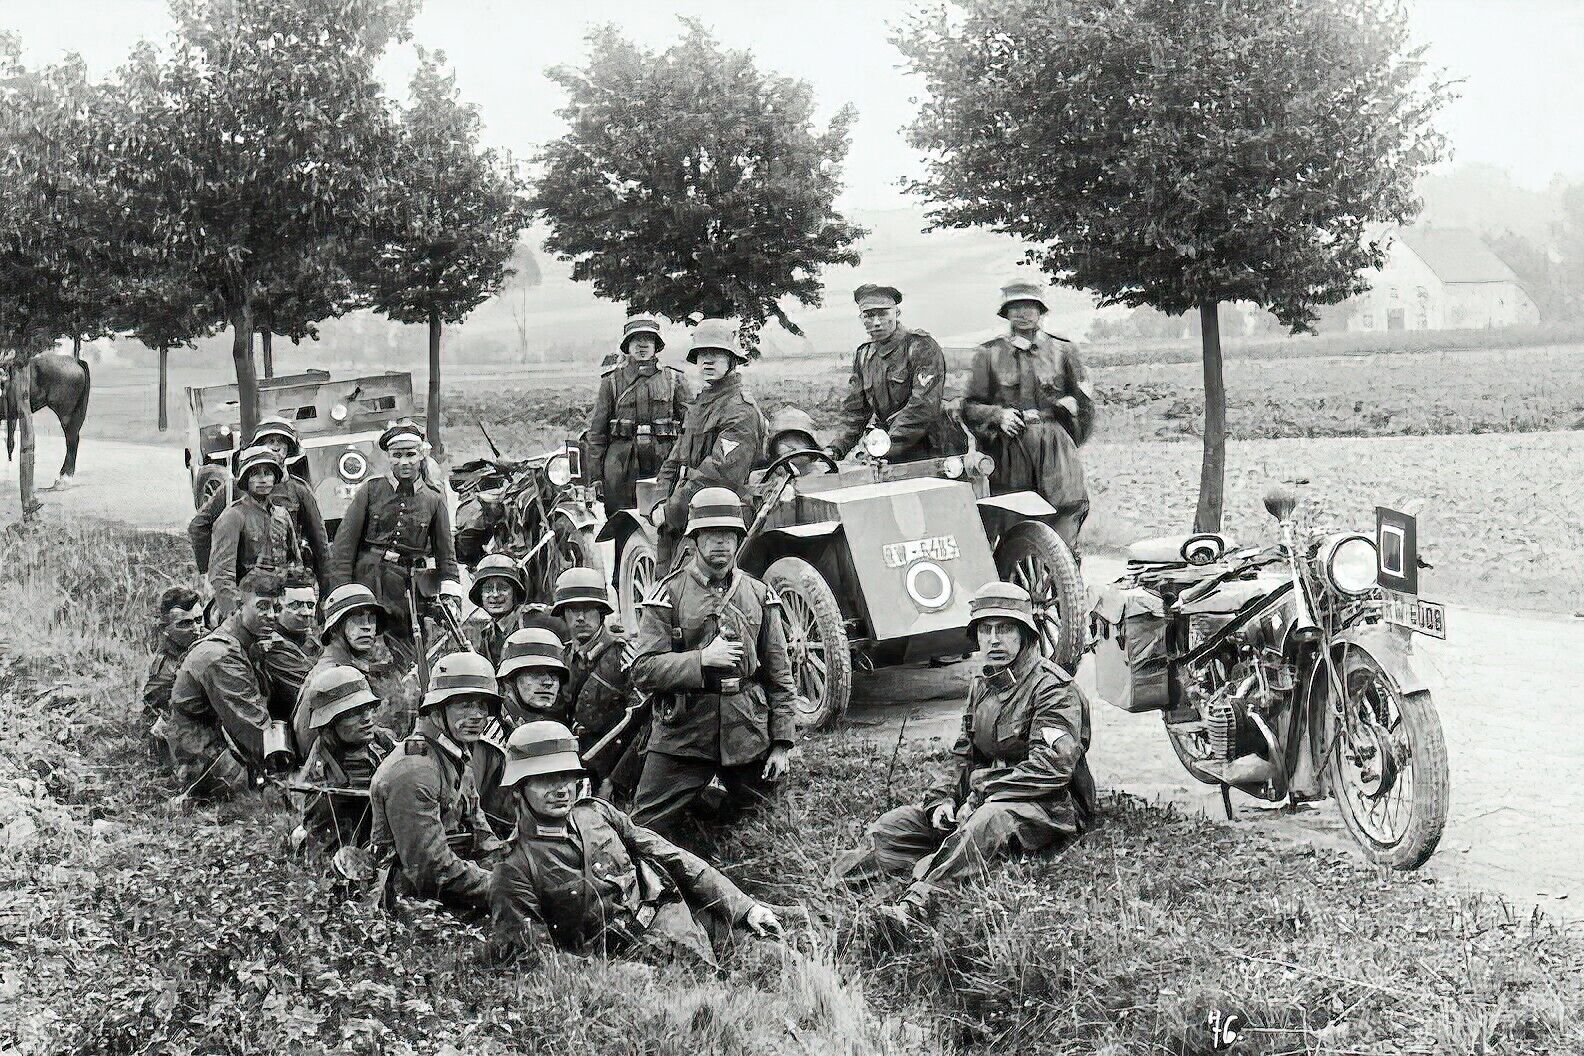 1930-BAD PYRMONT GERMANY-Maneuvers of Reichswehr Armed Forces-Third Reich-PHOTO